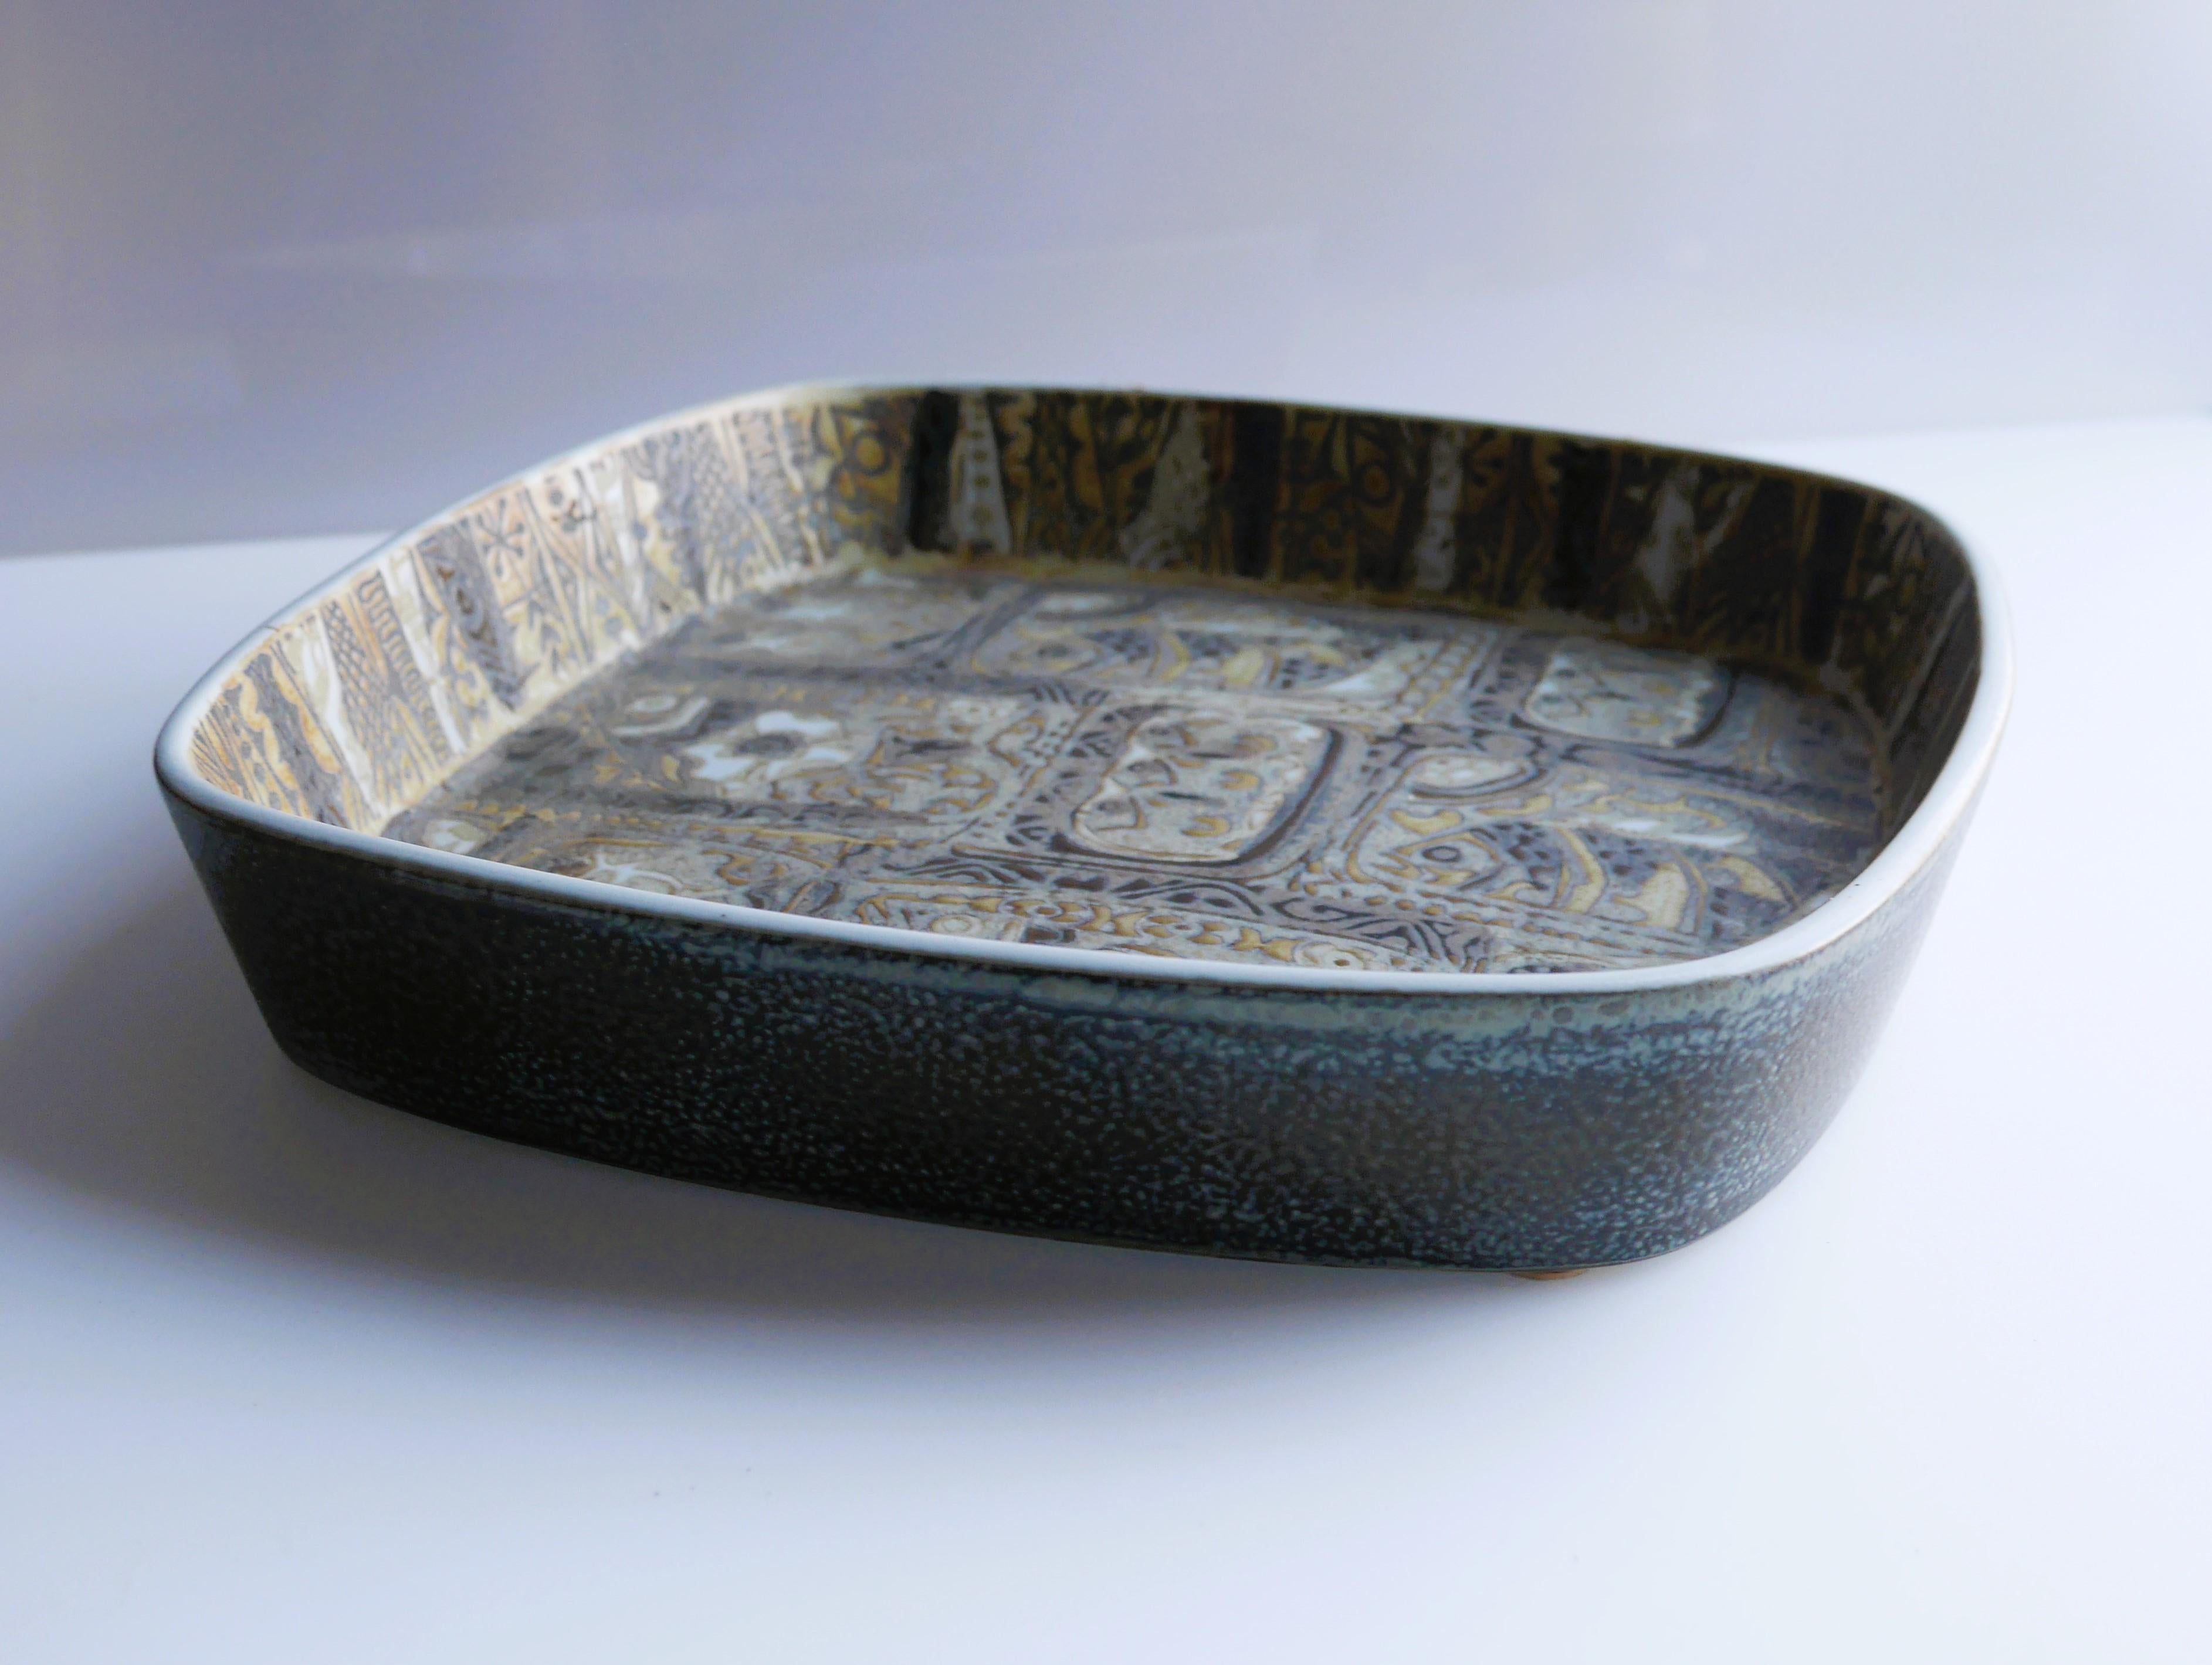 A fantastic faience bowl or plate by Nils Thorssen from Royal Copenhagen. The bowl has an abstract and intricate pattern, which reminds you of a mosaic church window, it is intricate, detailed and shows amazing professional skills. The model is